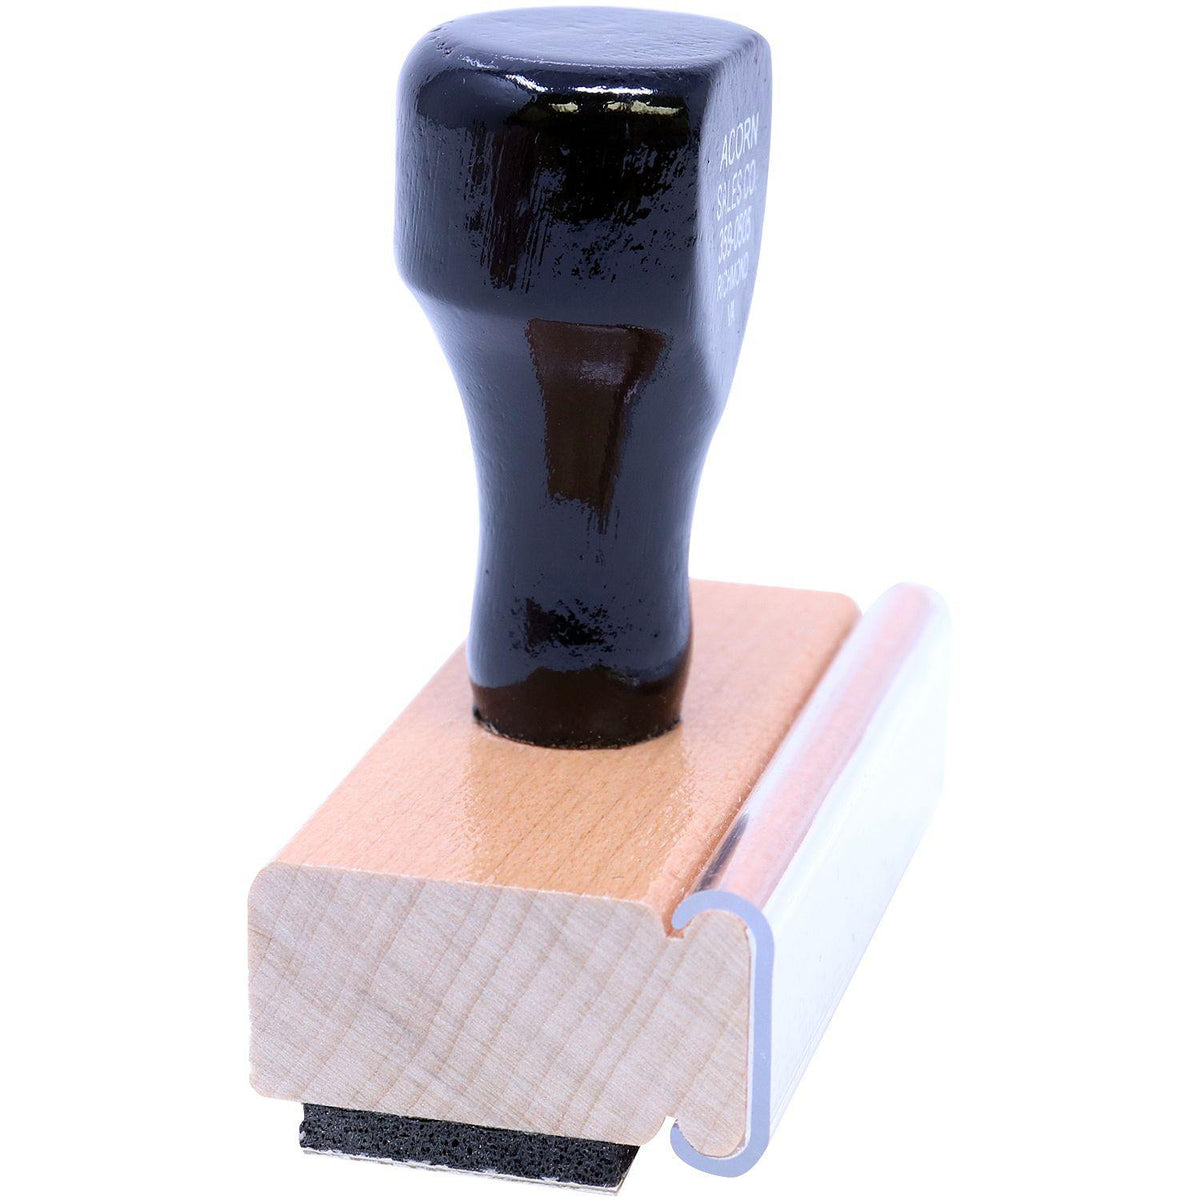 Side View of Clients Copy Rubber Stamp at an Angle